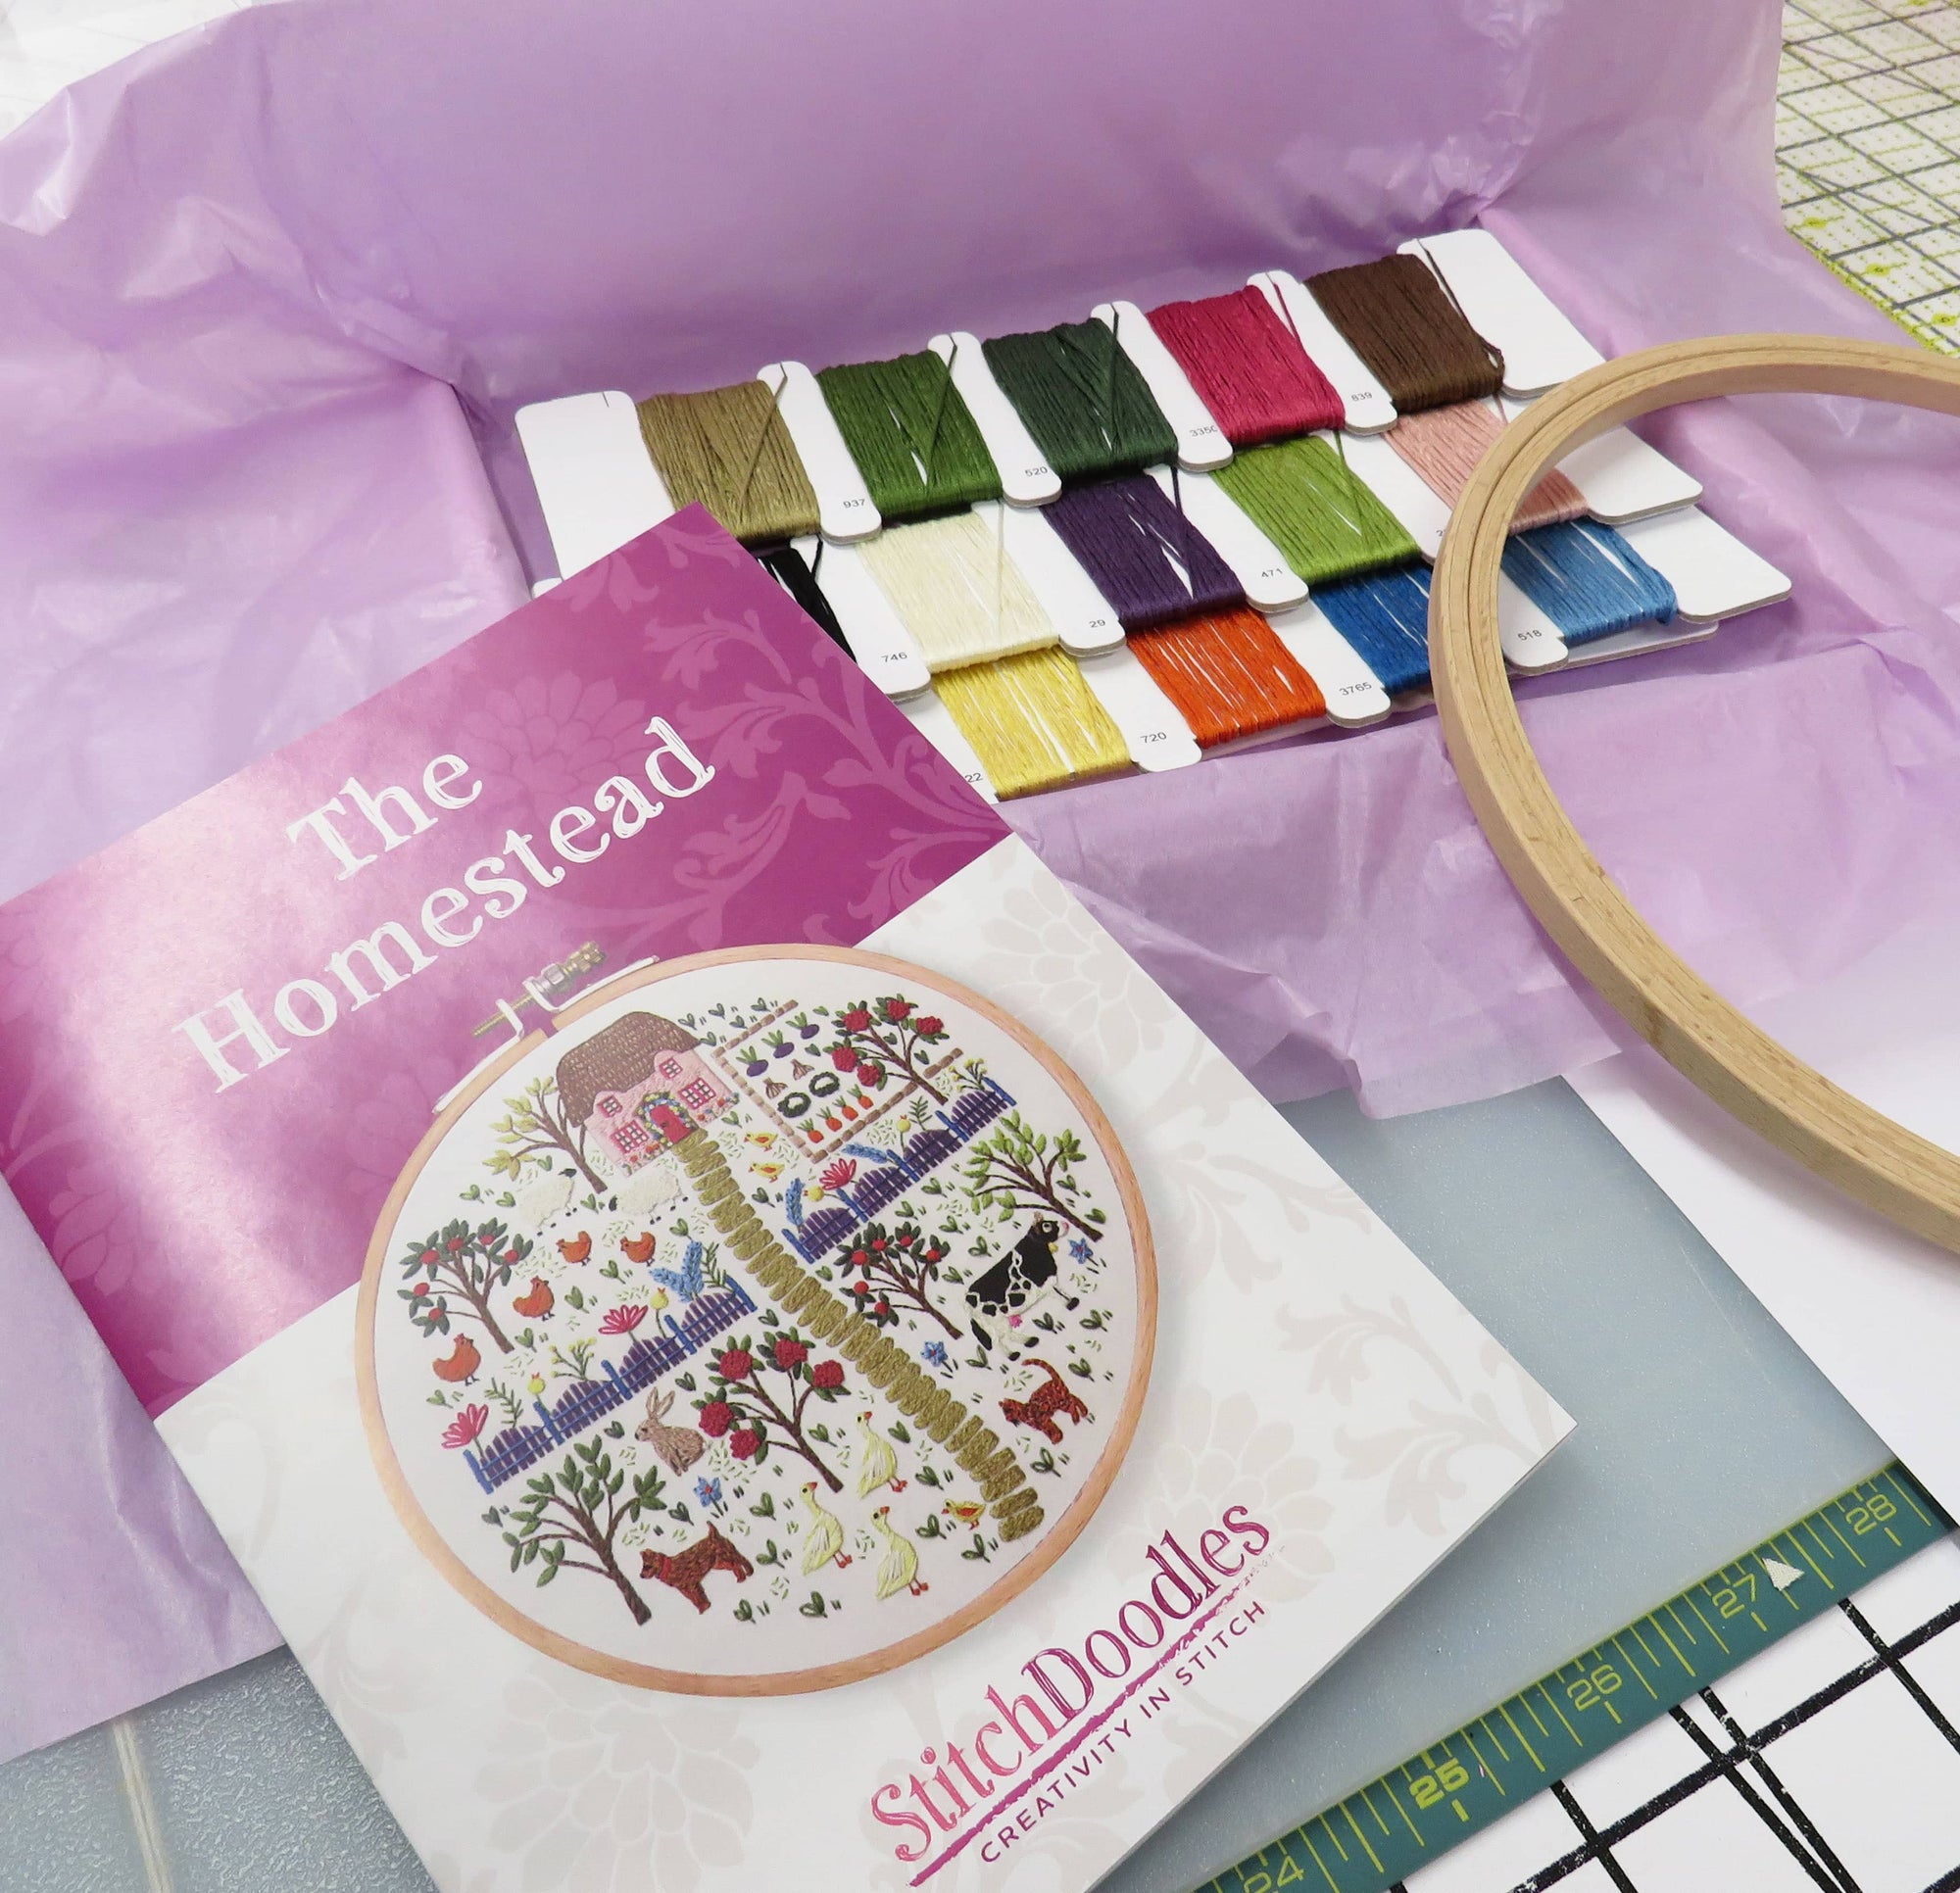 The Homestead Hand Embroidery Kit